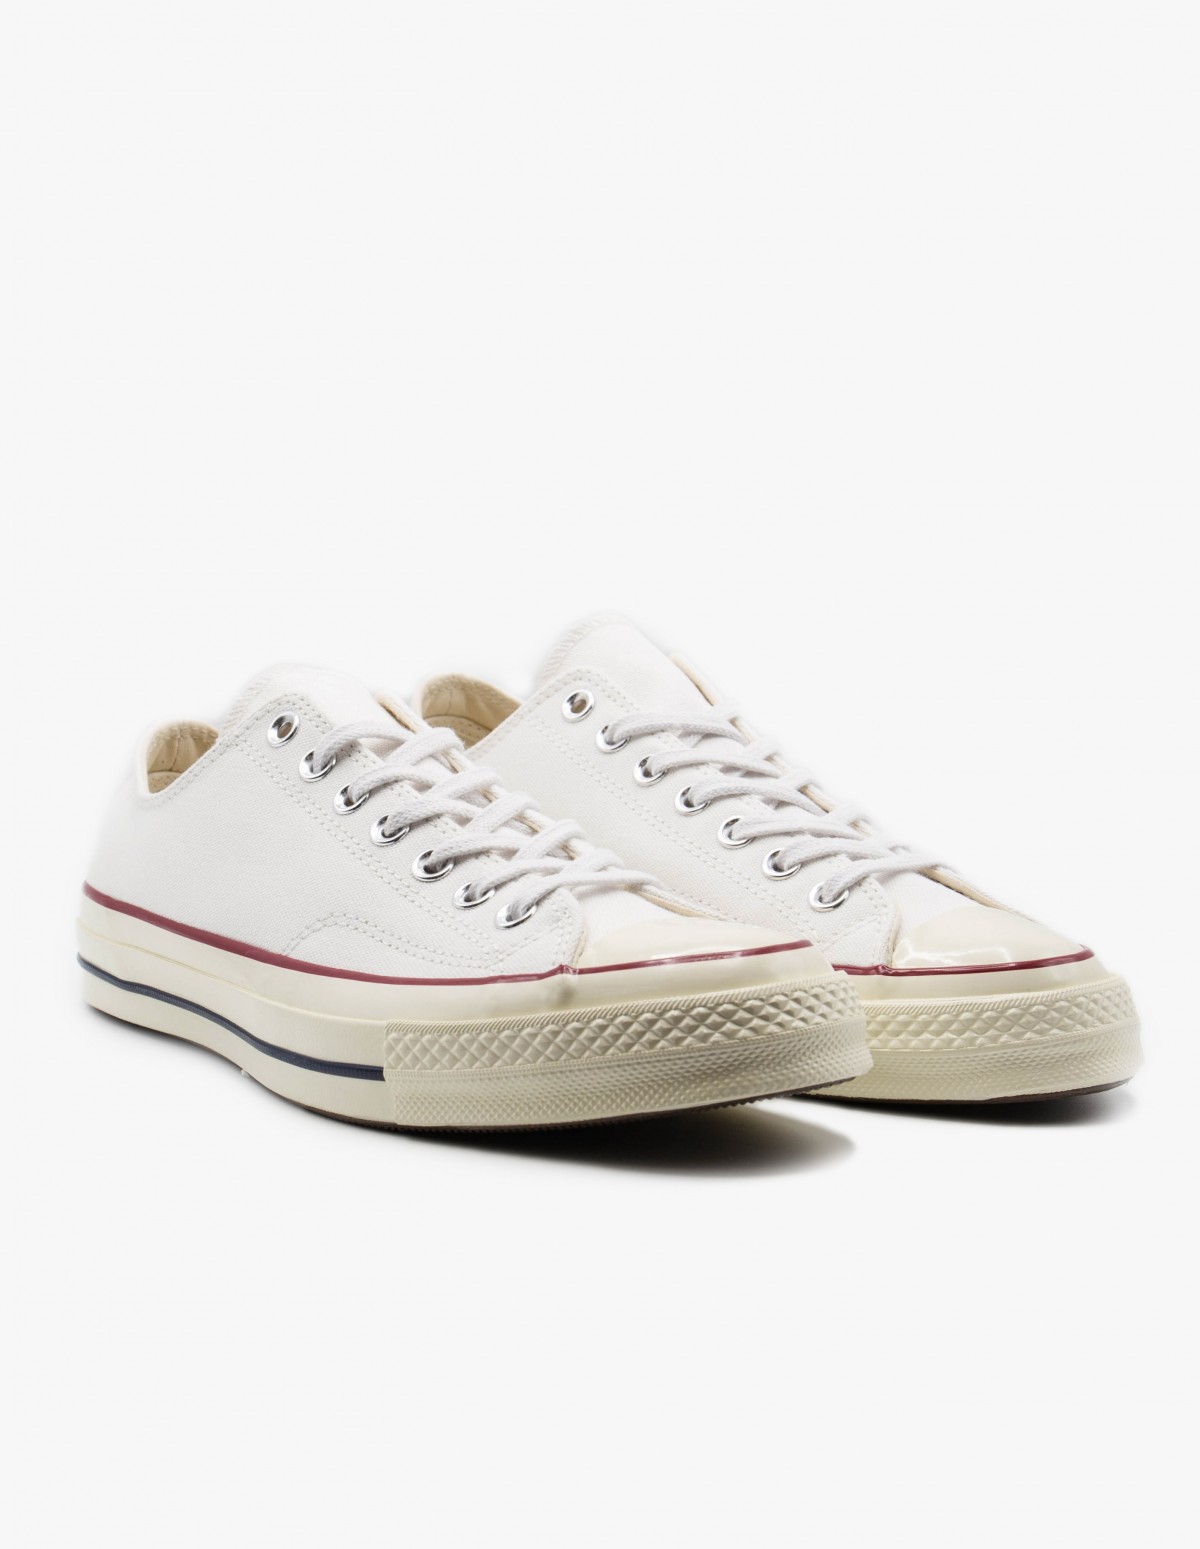 Converse Chuck Taylor Low OX All Star '70 in White